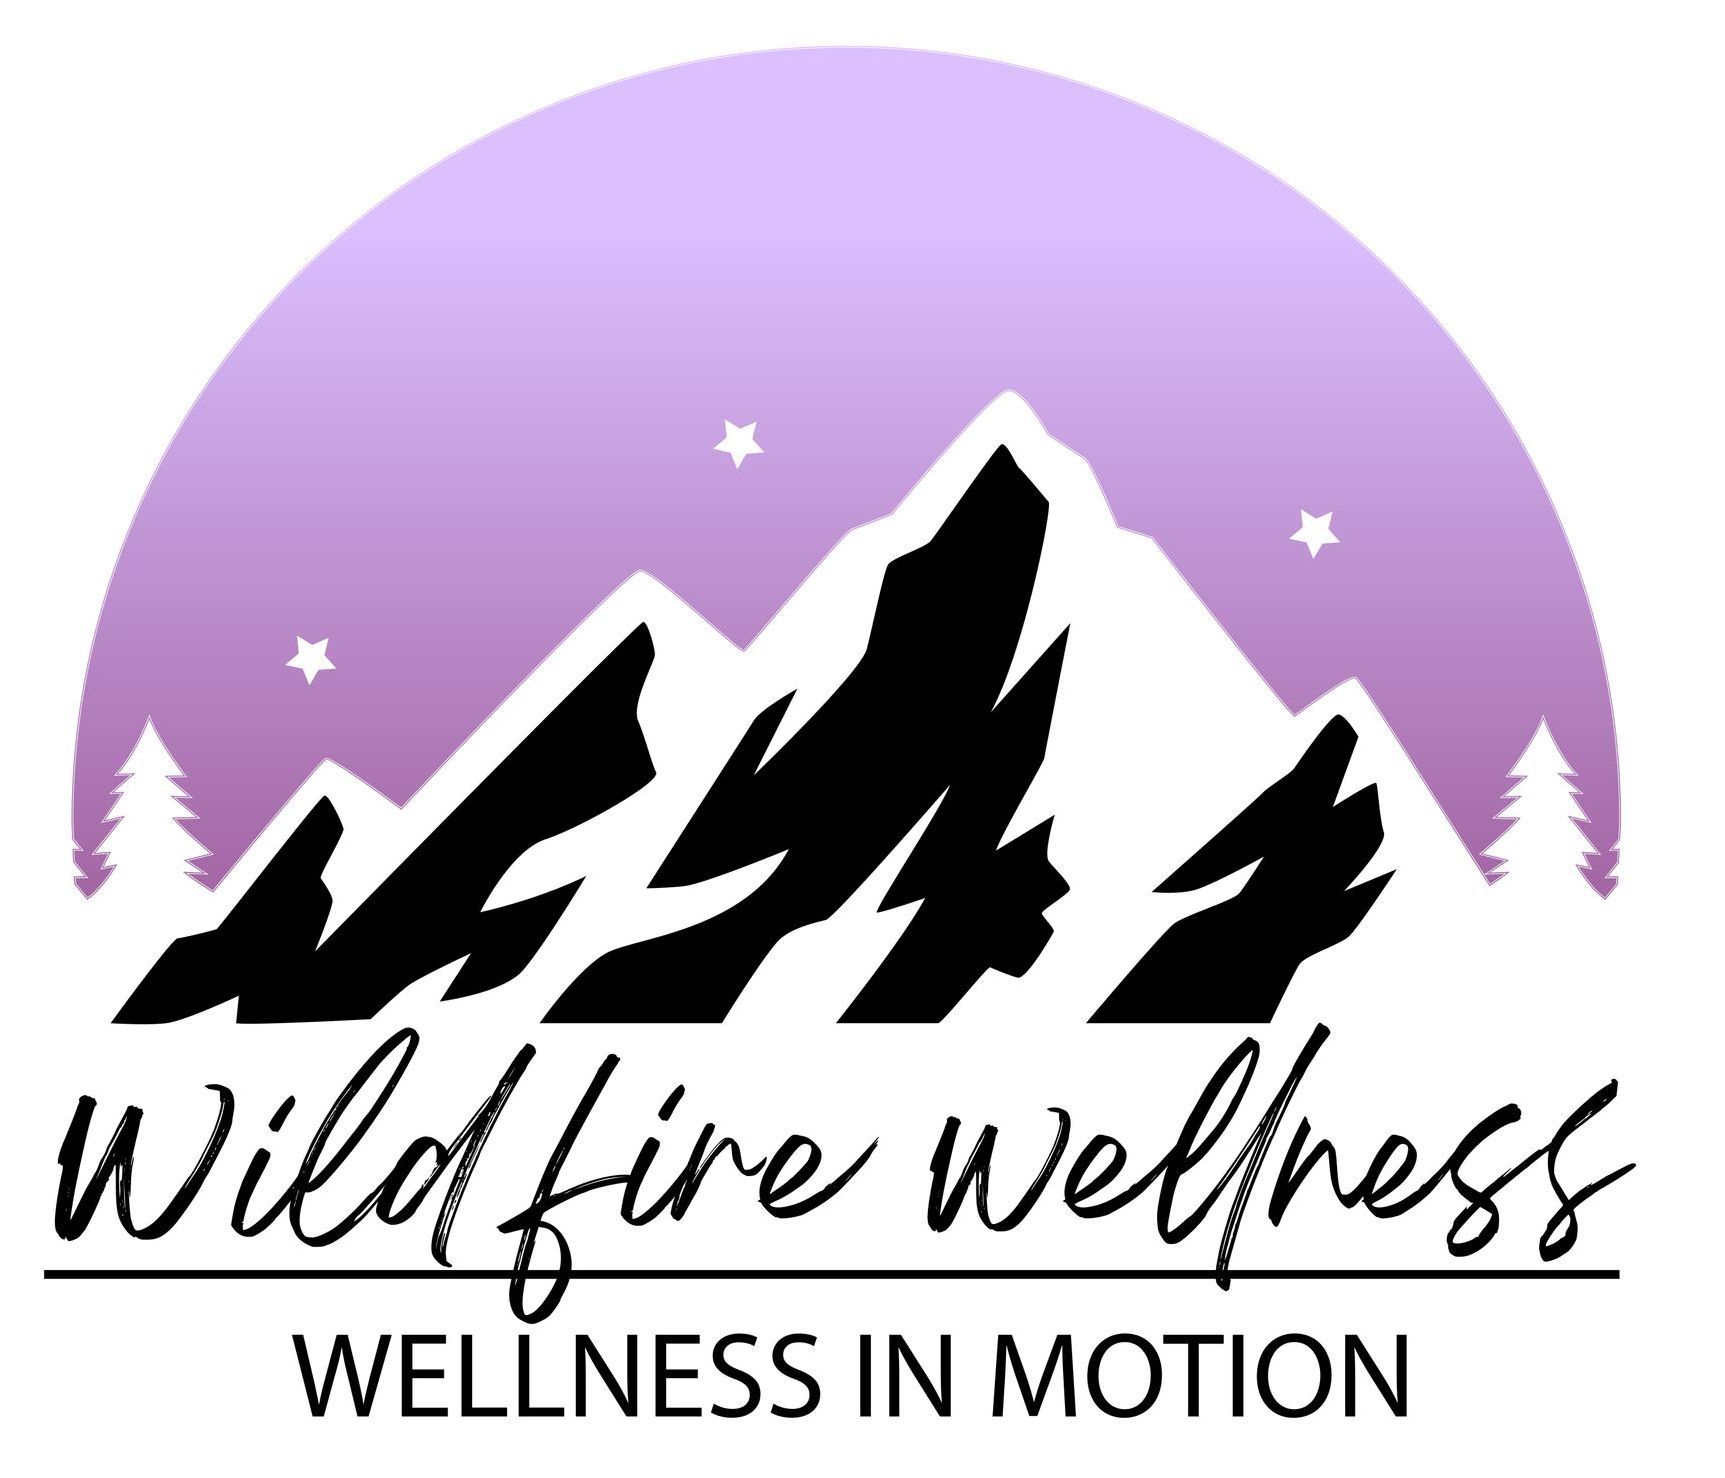 A logo for wildfire wellness wellness in motion with a mountain in the background.